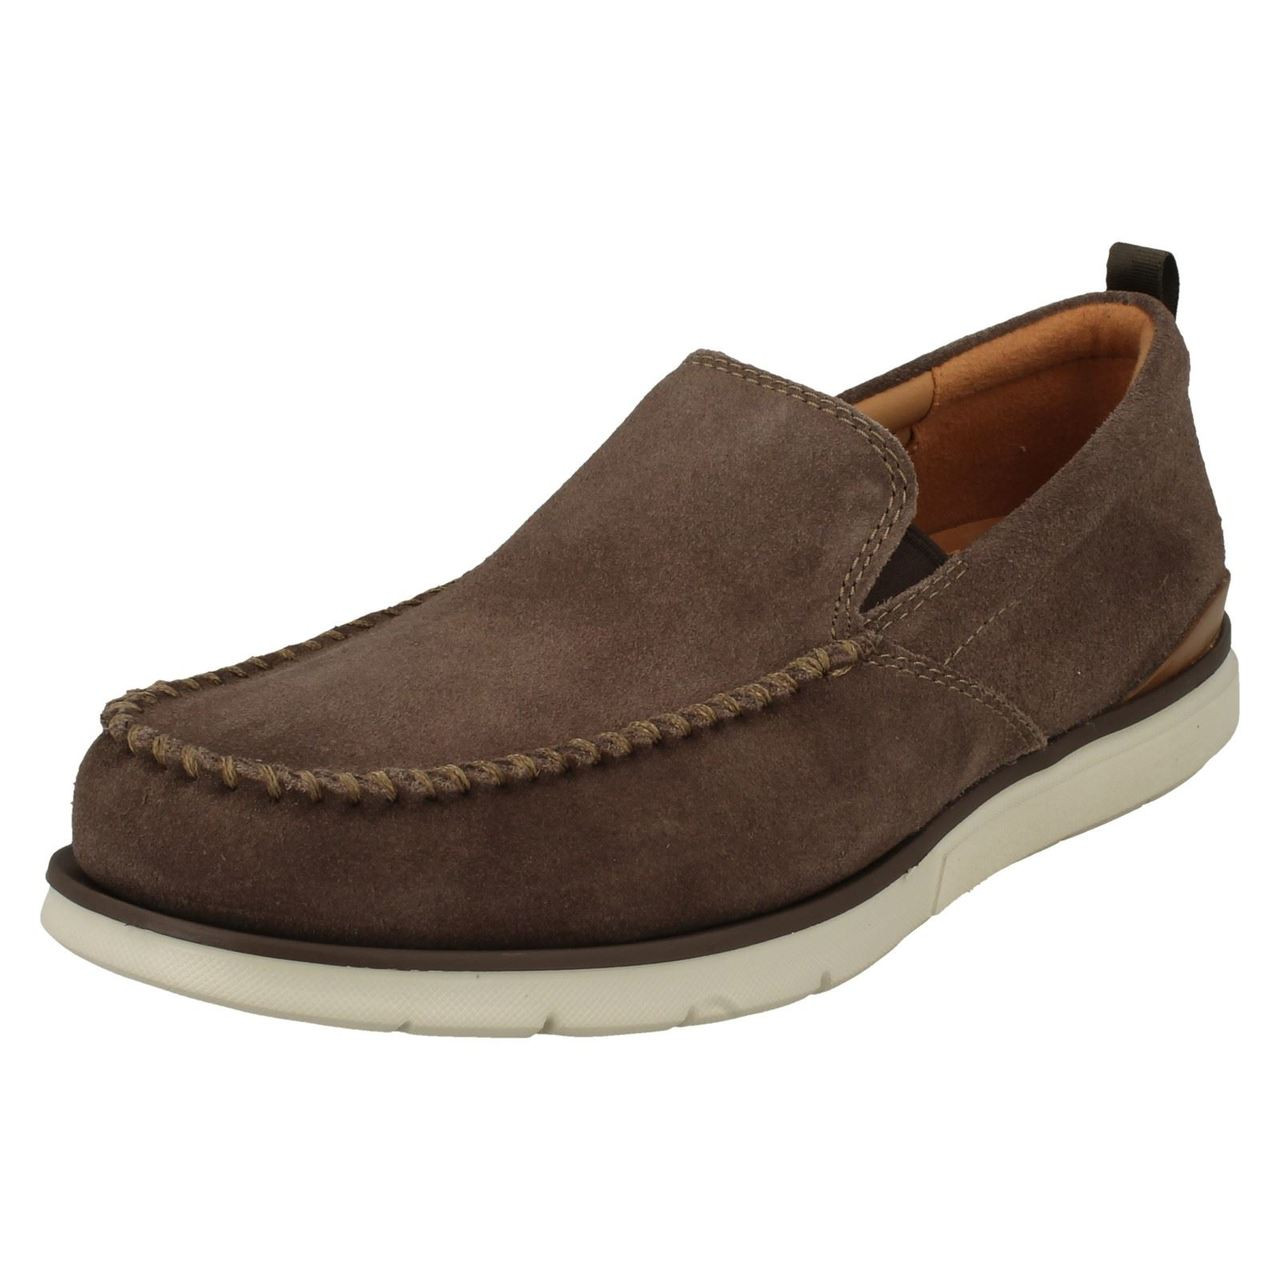 clarks casual slip on shoes